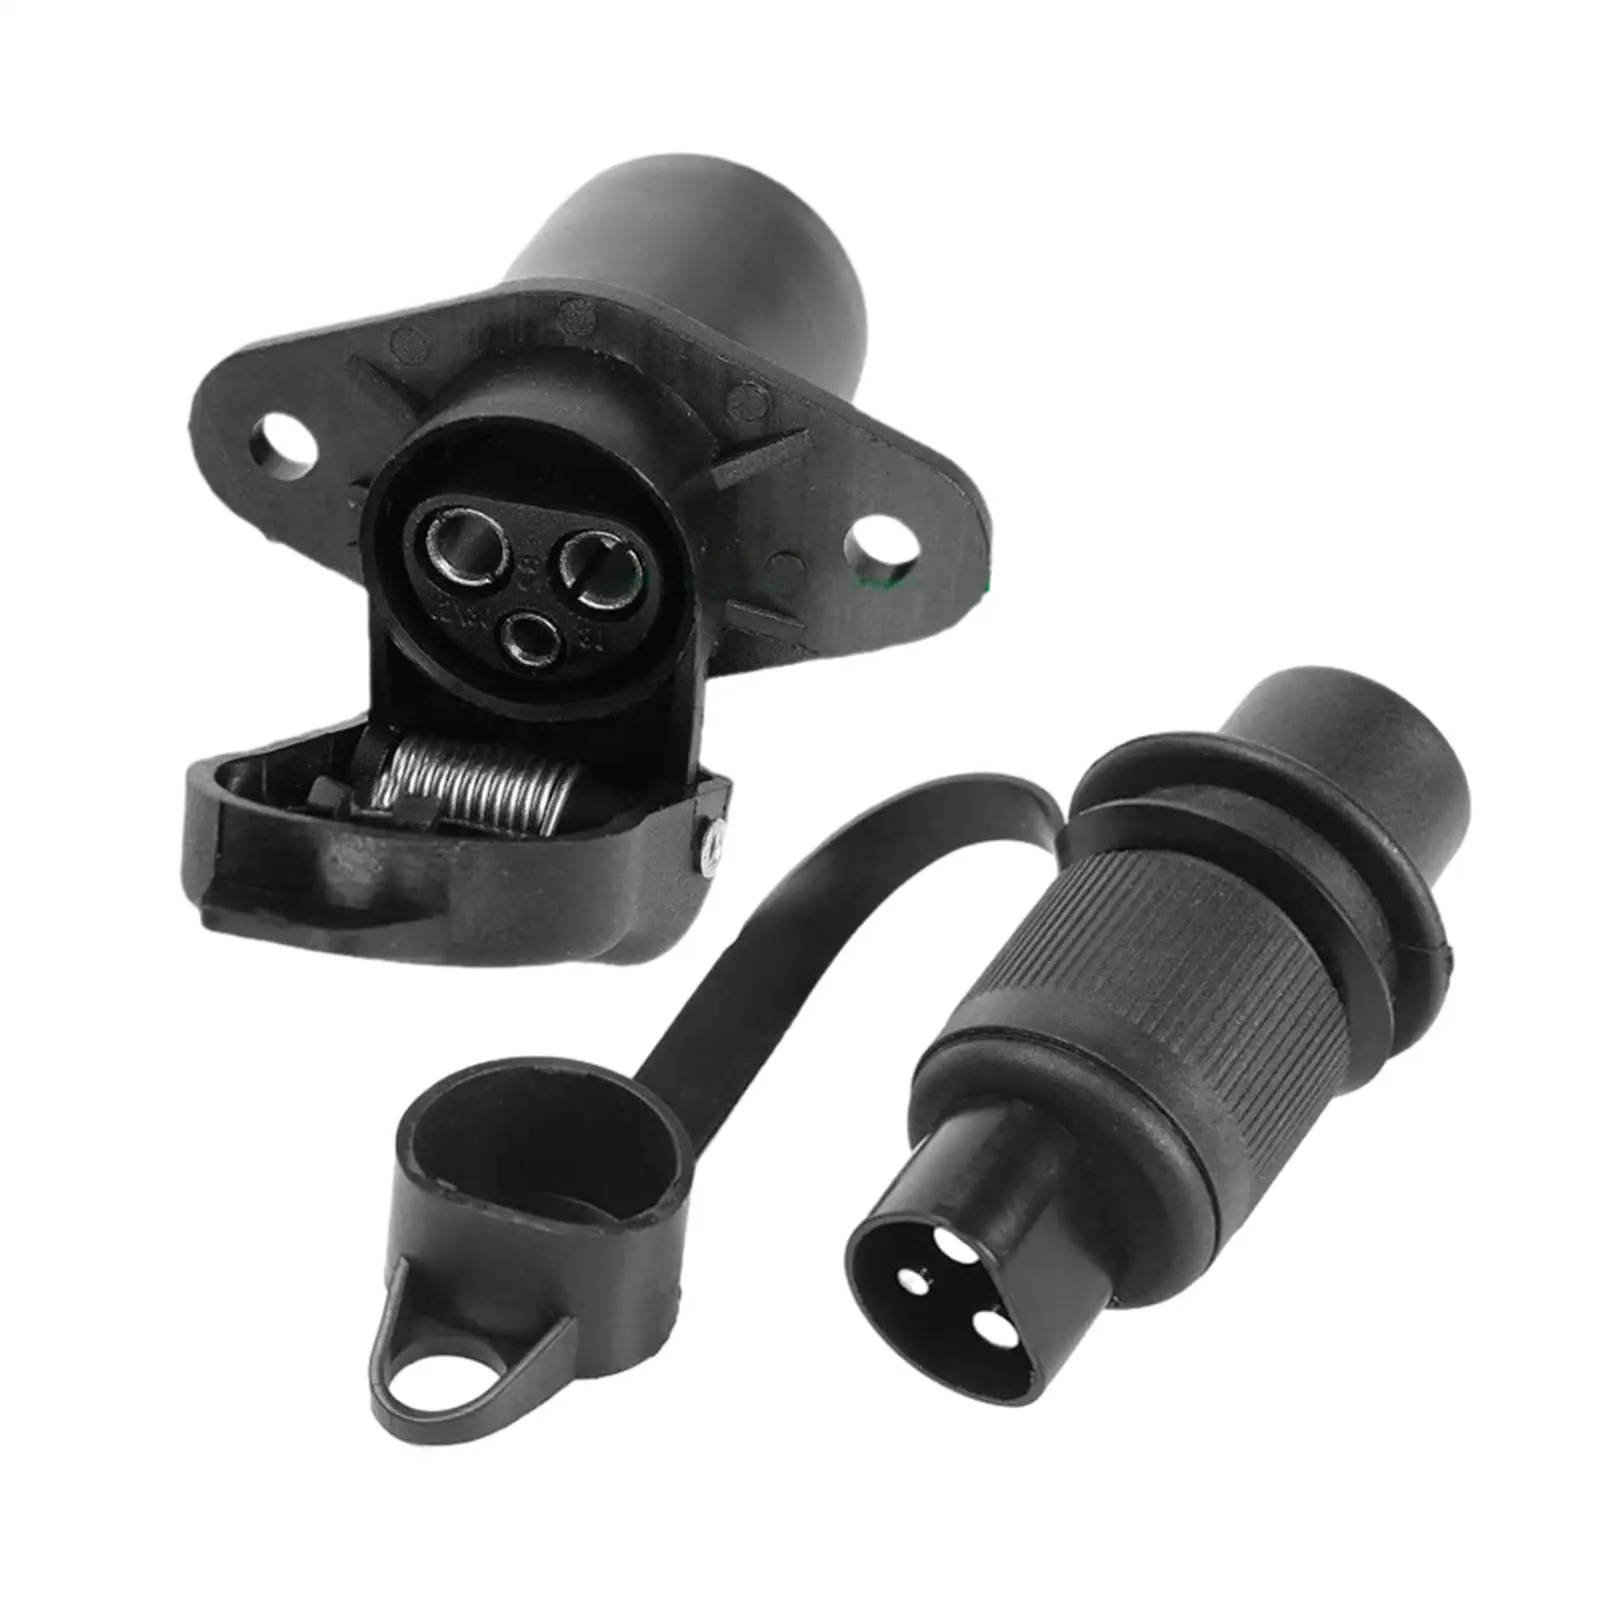 Plug Socket Trailer Connector RV 12V Accessories Round Towing for Commercial Vehicle Van Boat Auto Electrical Caravan Truck